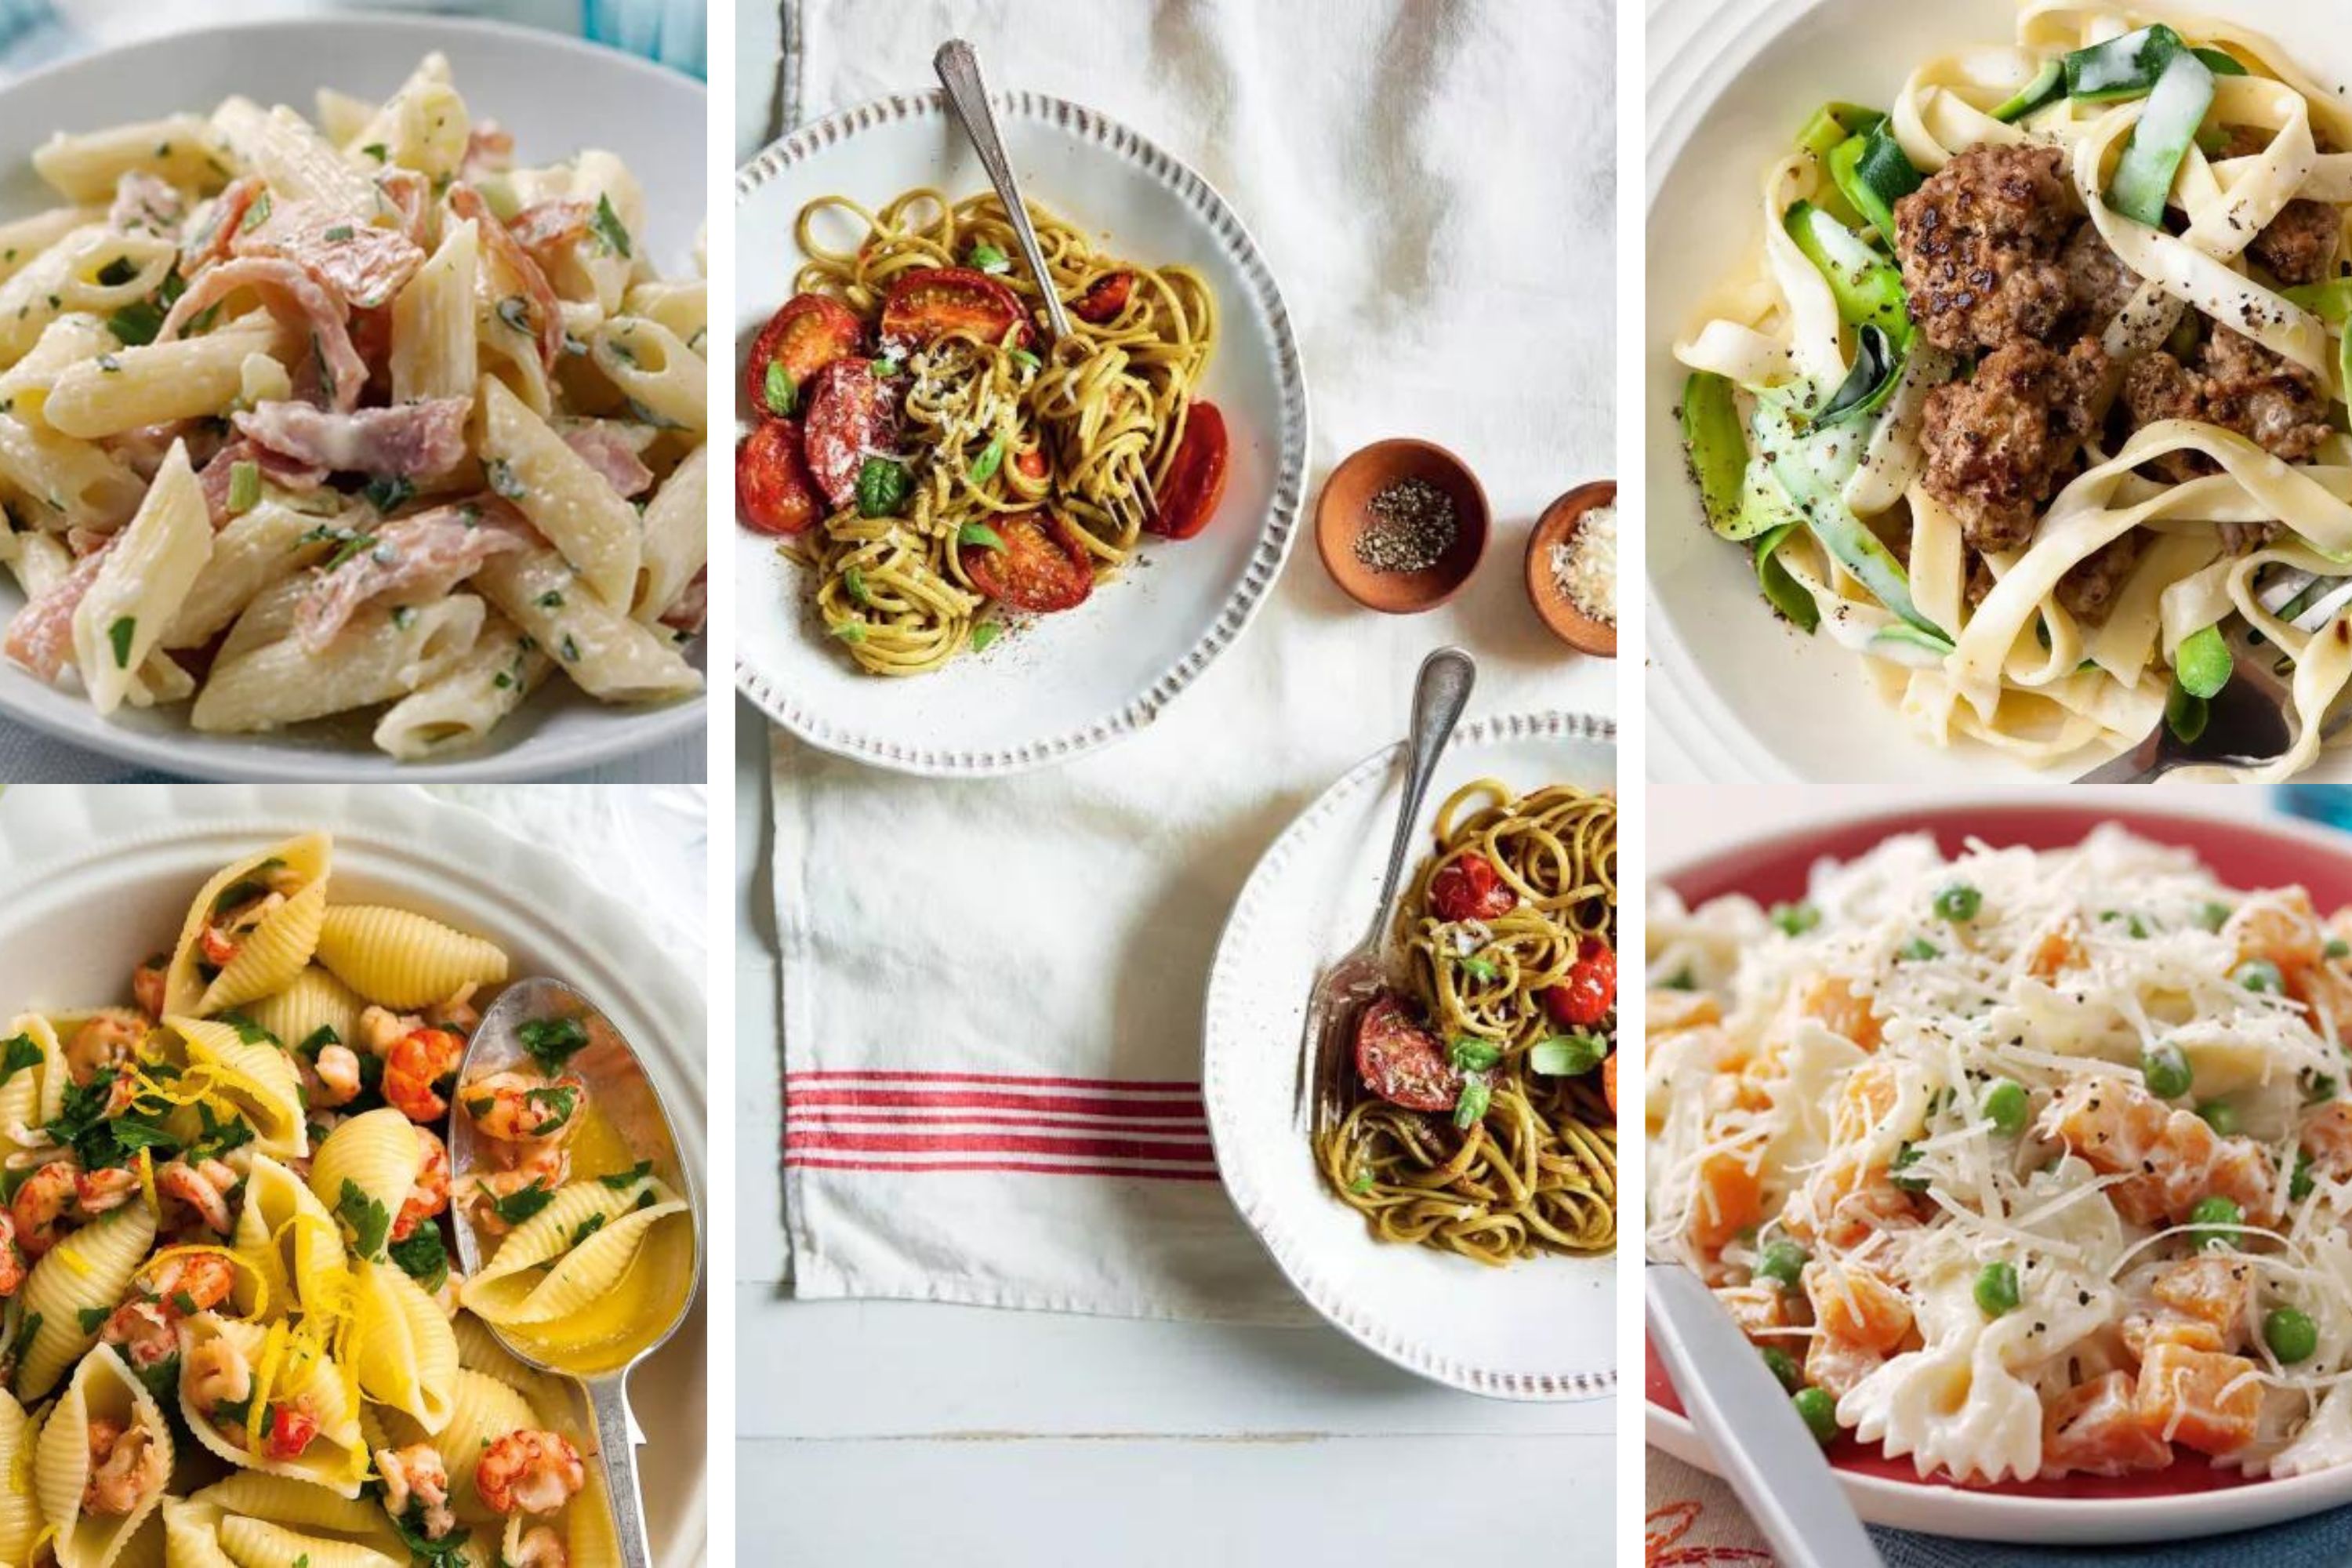 Low calorie pasta recipes for those counting calories